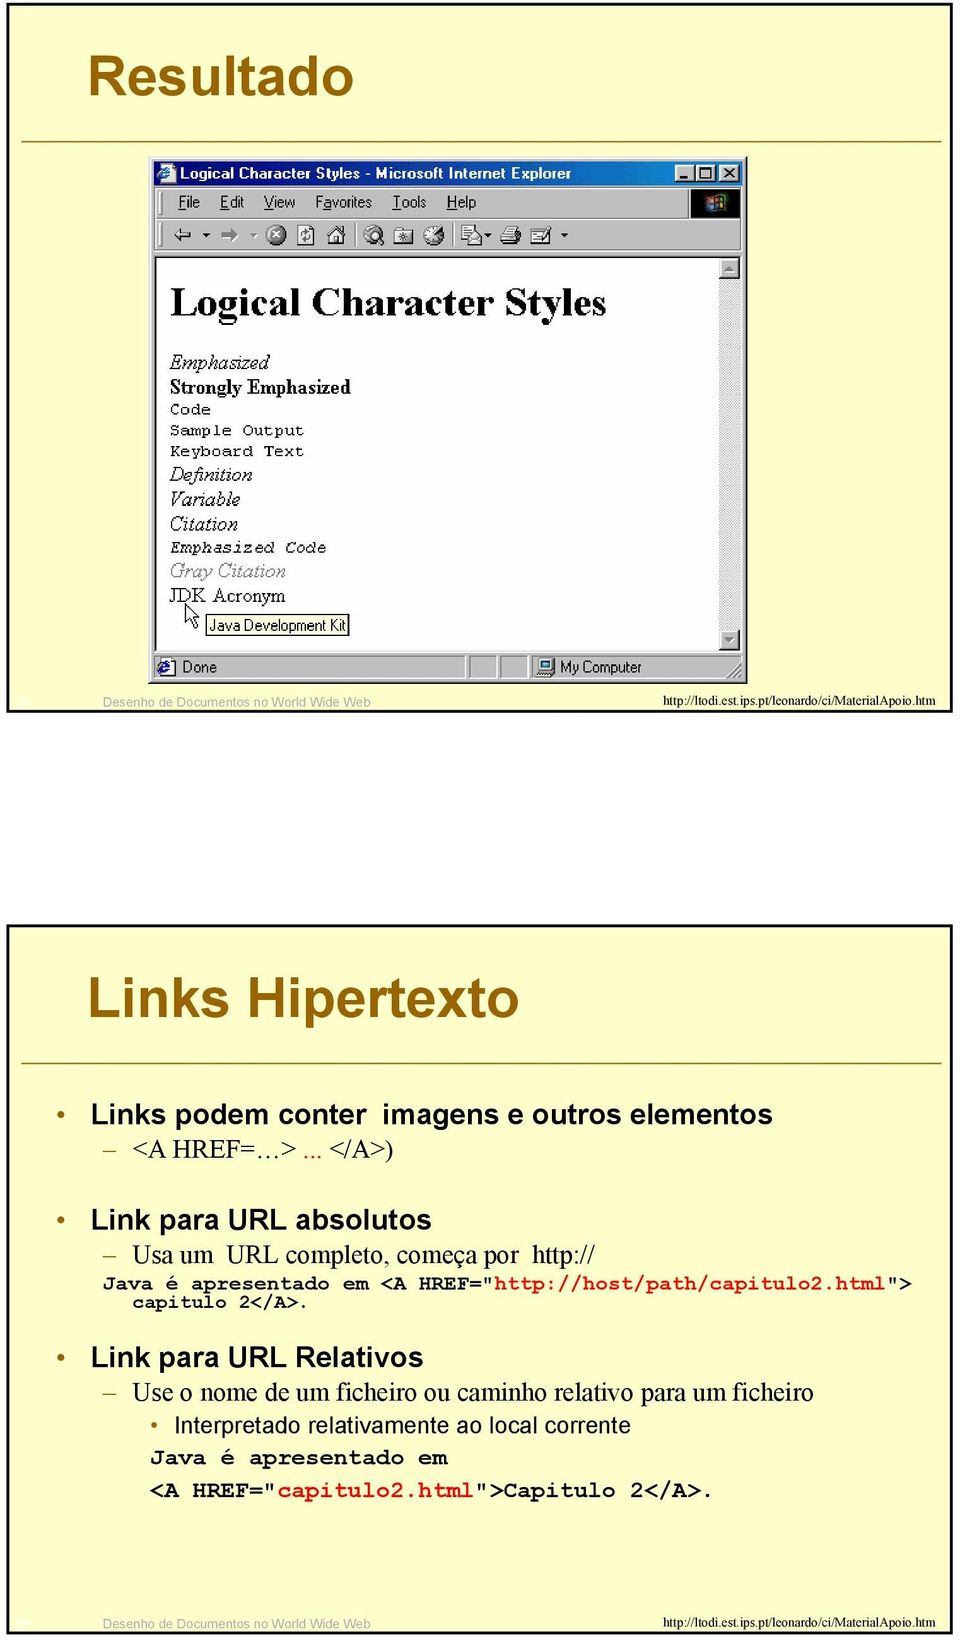 html"> capitulo 2</A>.